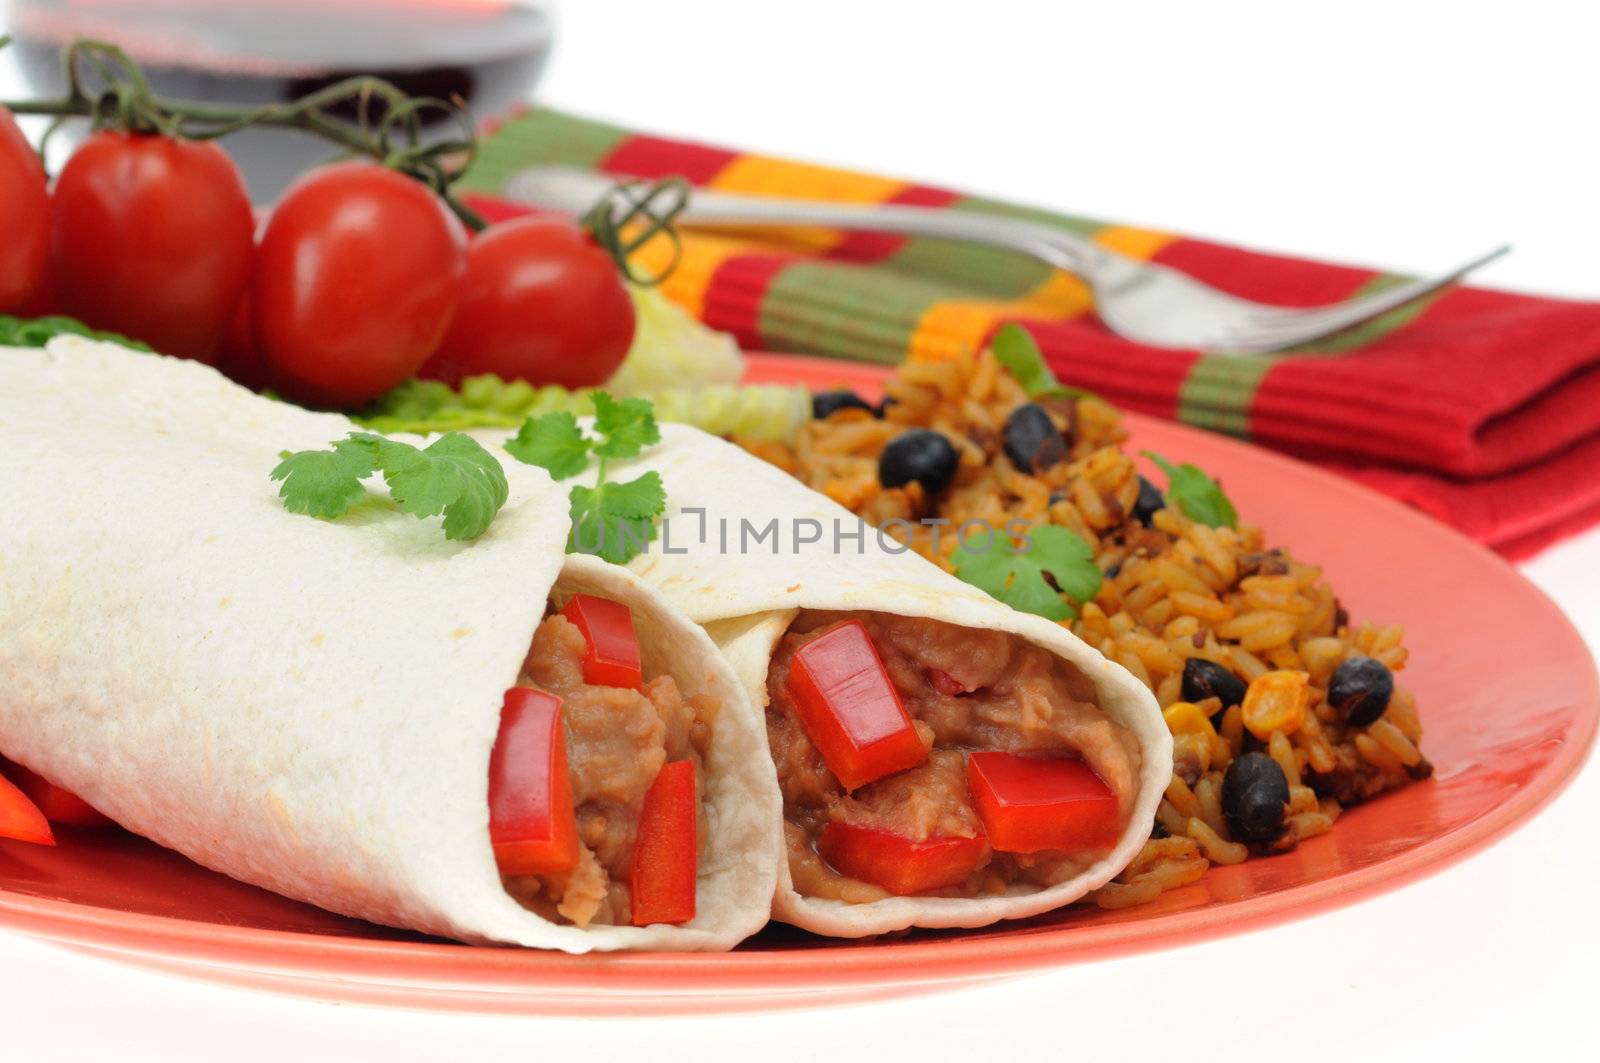 Delicious bean burrito served with mexican style rice.